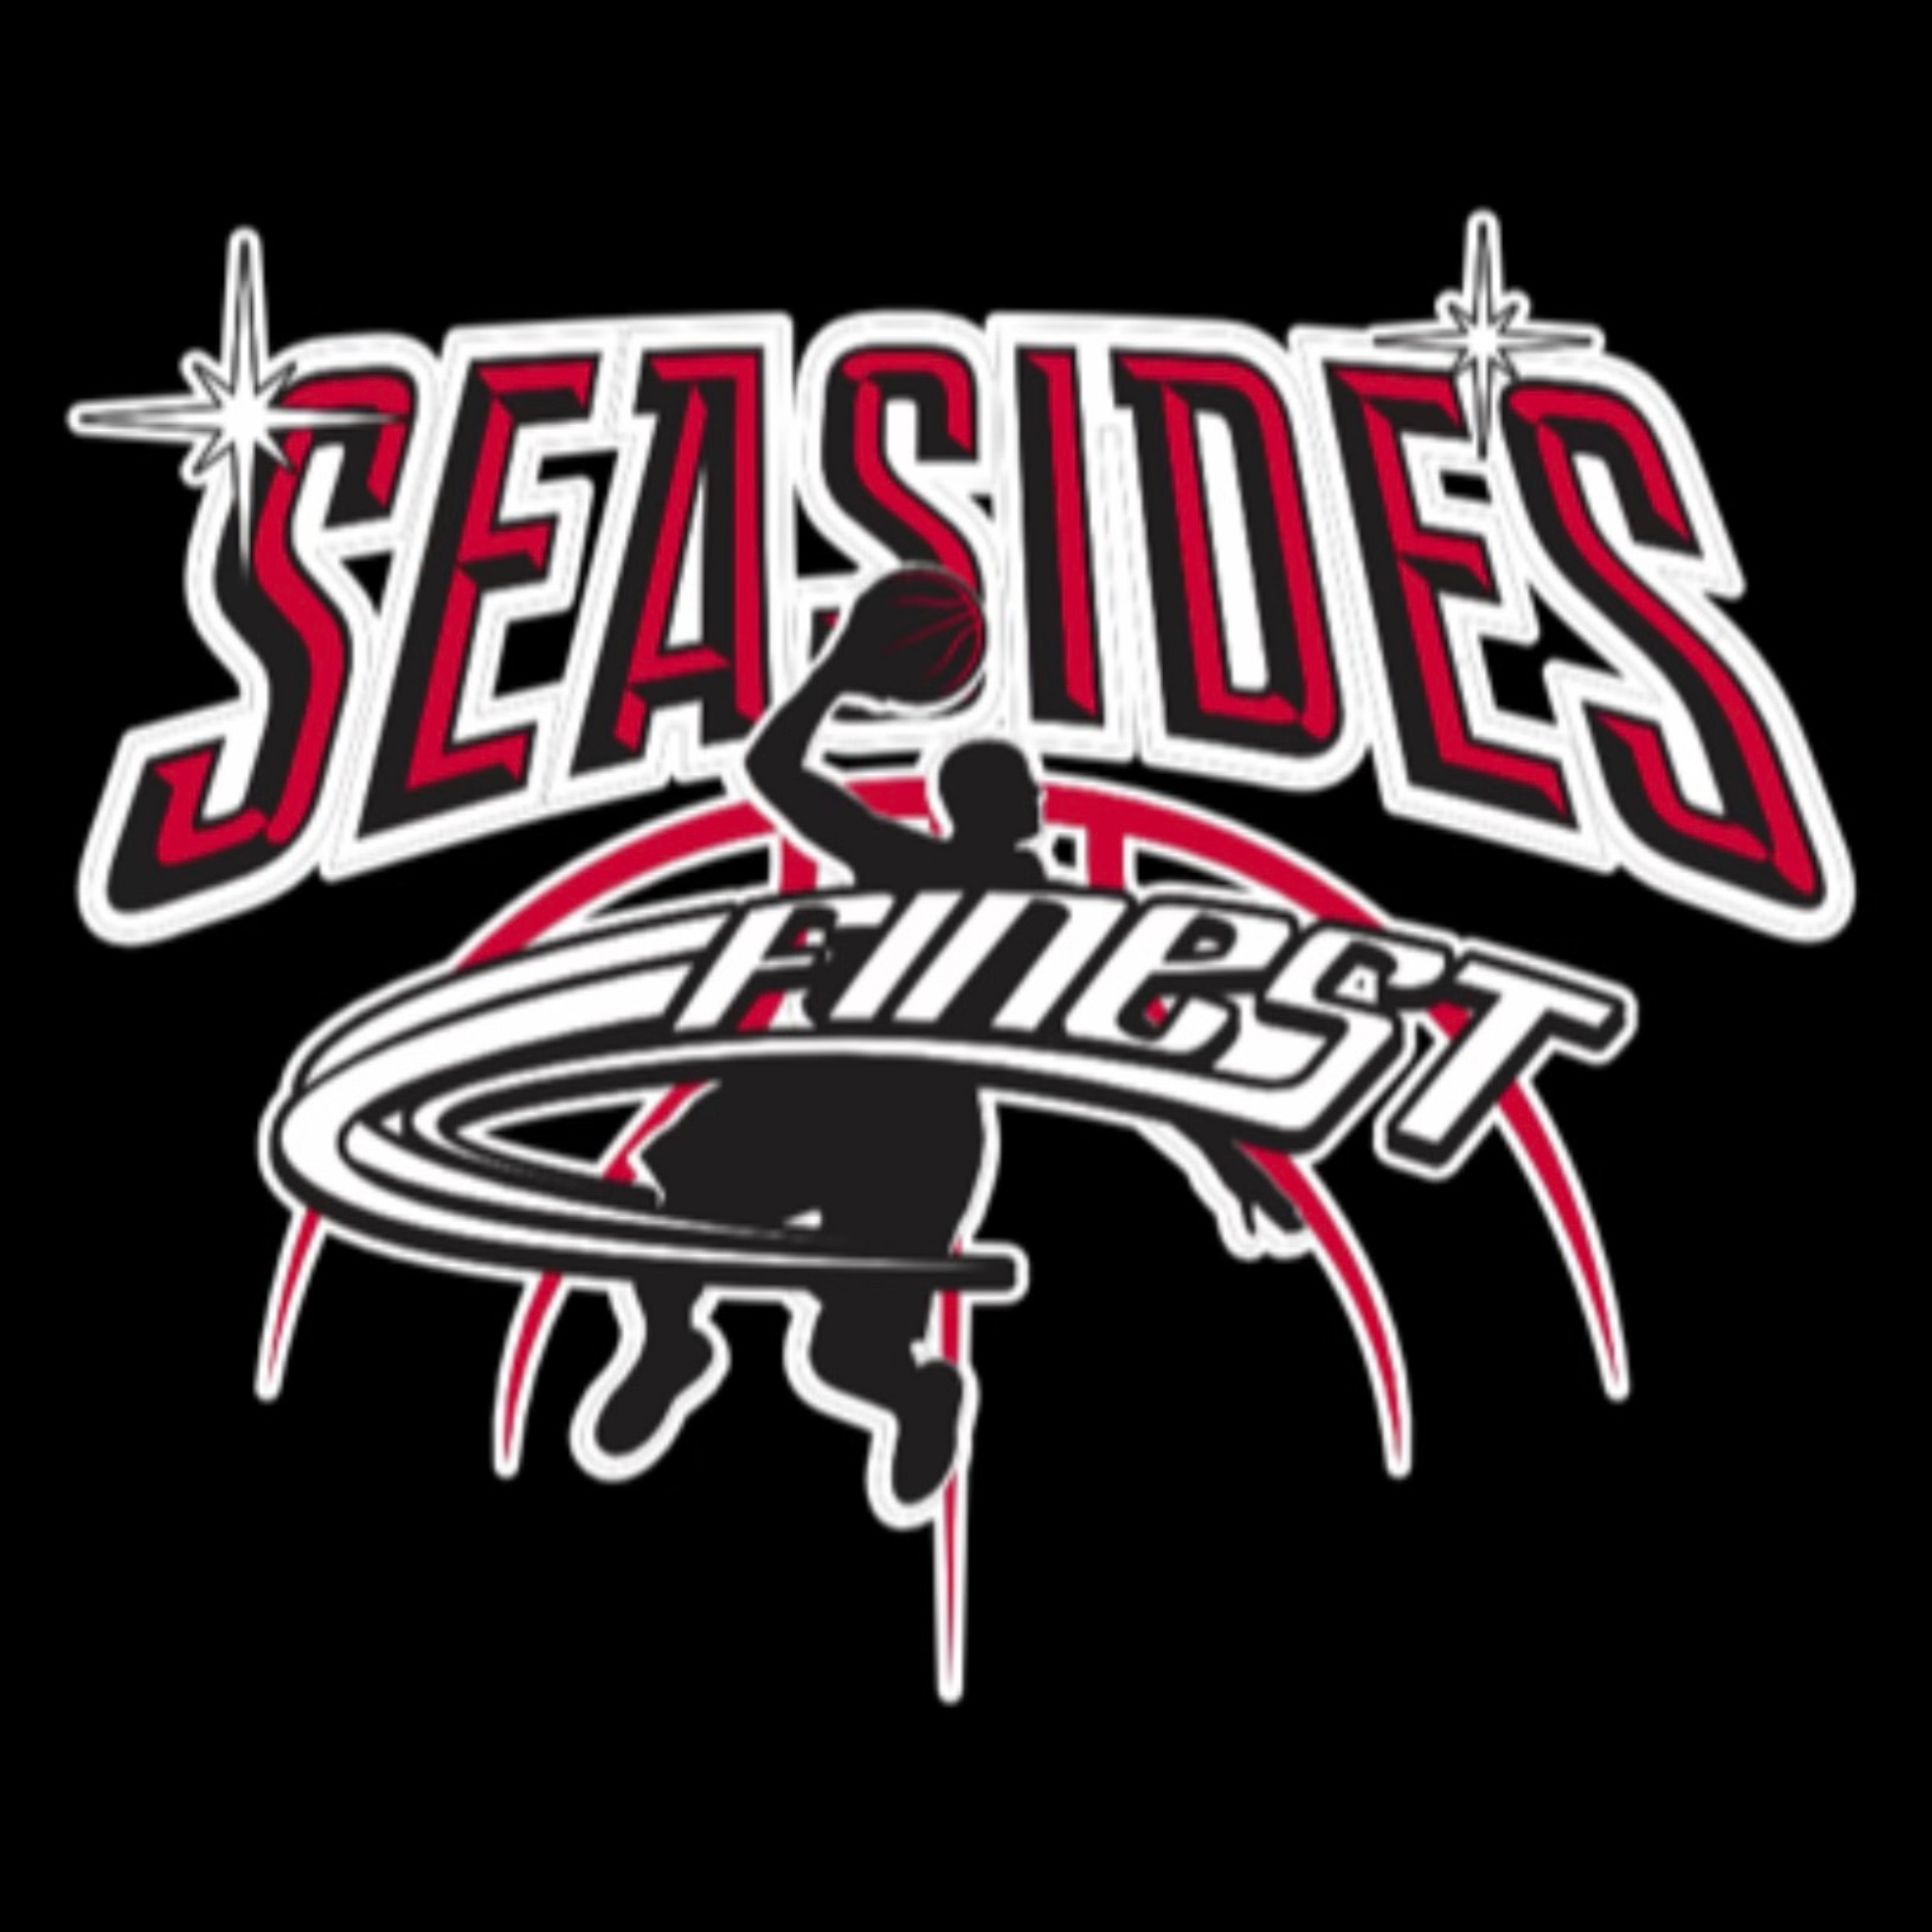 The official logo of Seaside’s Finest